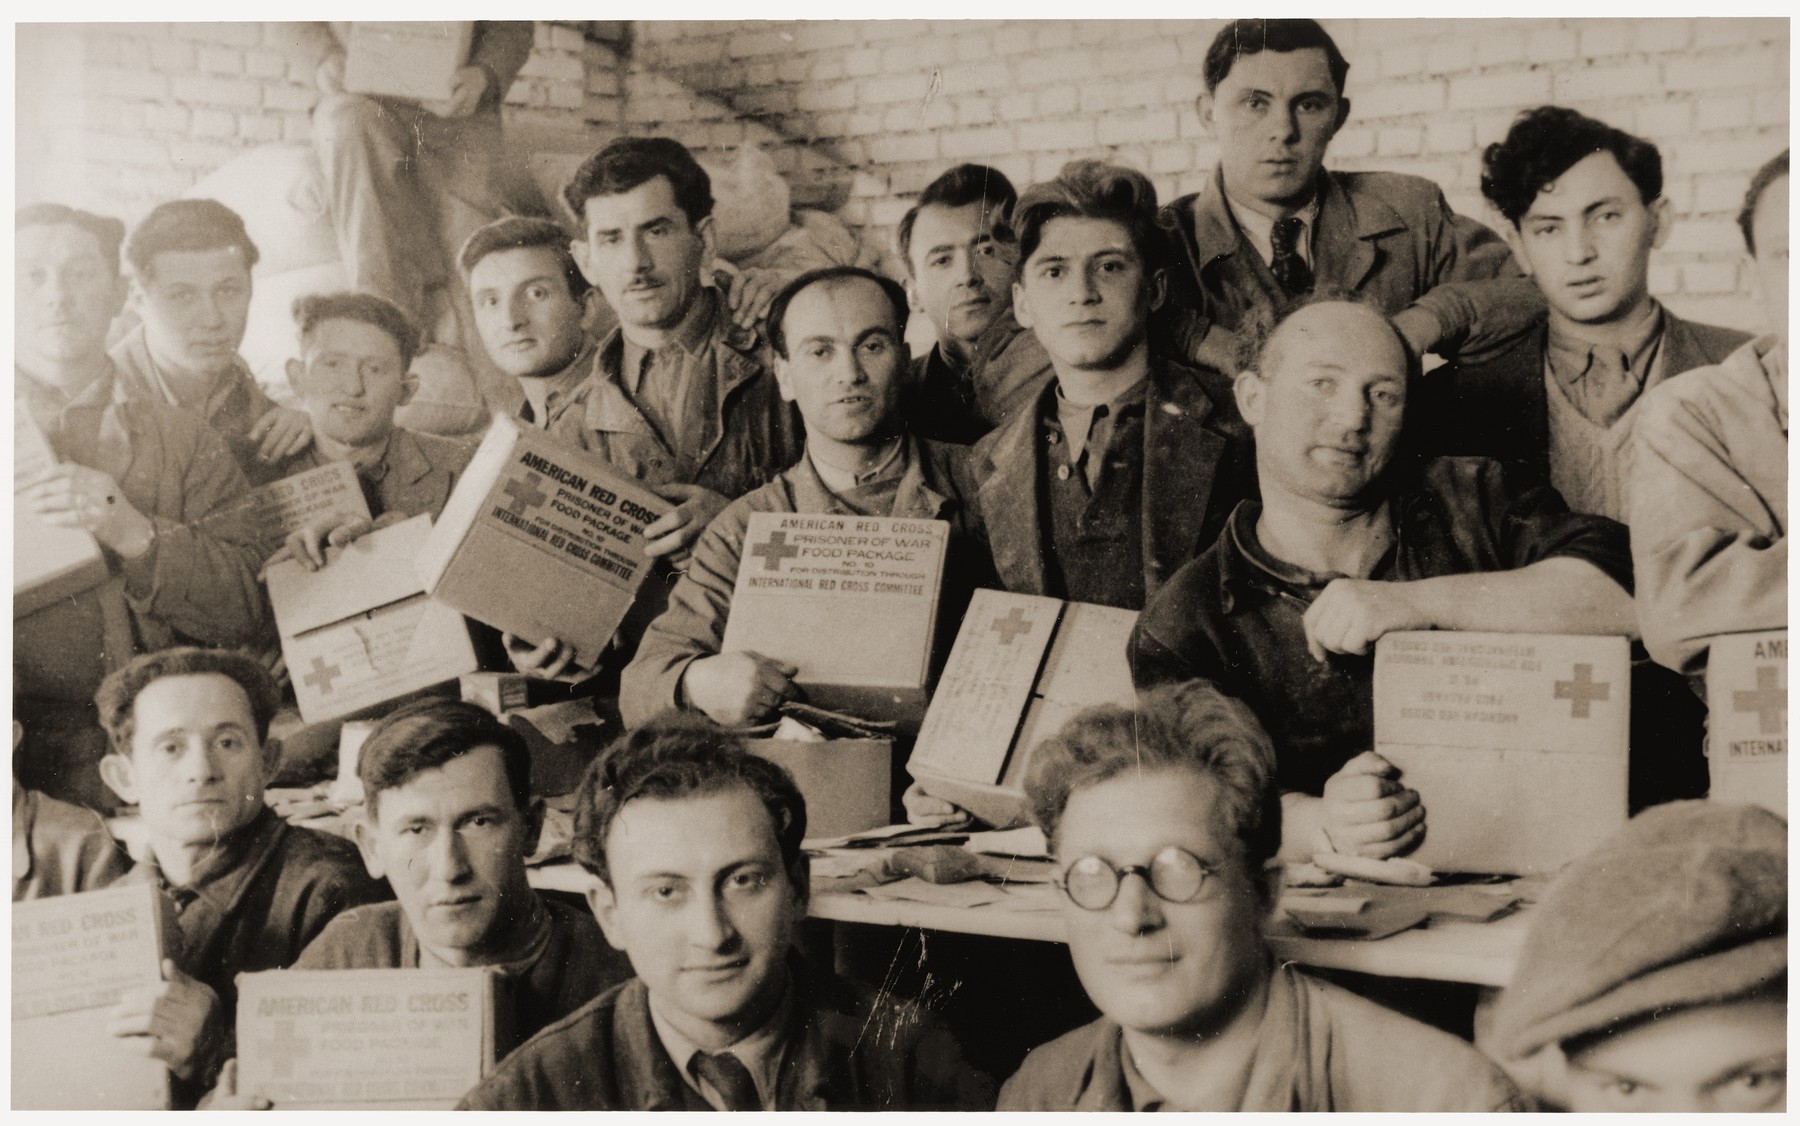 Group portrait of Jewish DPs holding American Red Cross food parcels at the Feldafing displaced persons camp.

Among those pictured is Leon Bergrin (second row, sixth from the left).